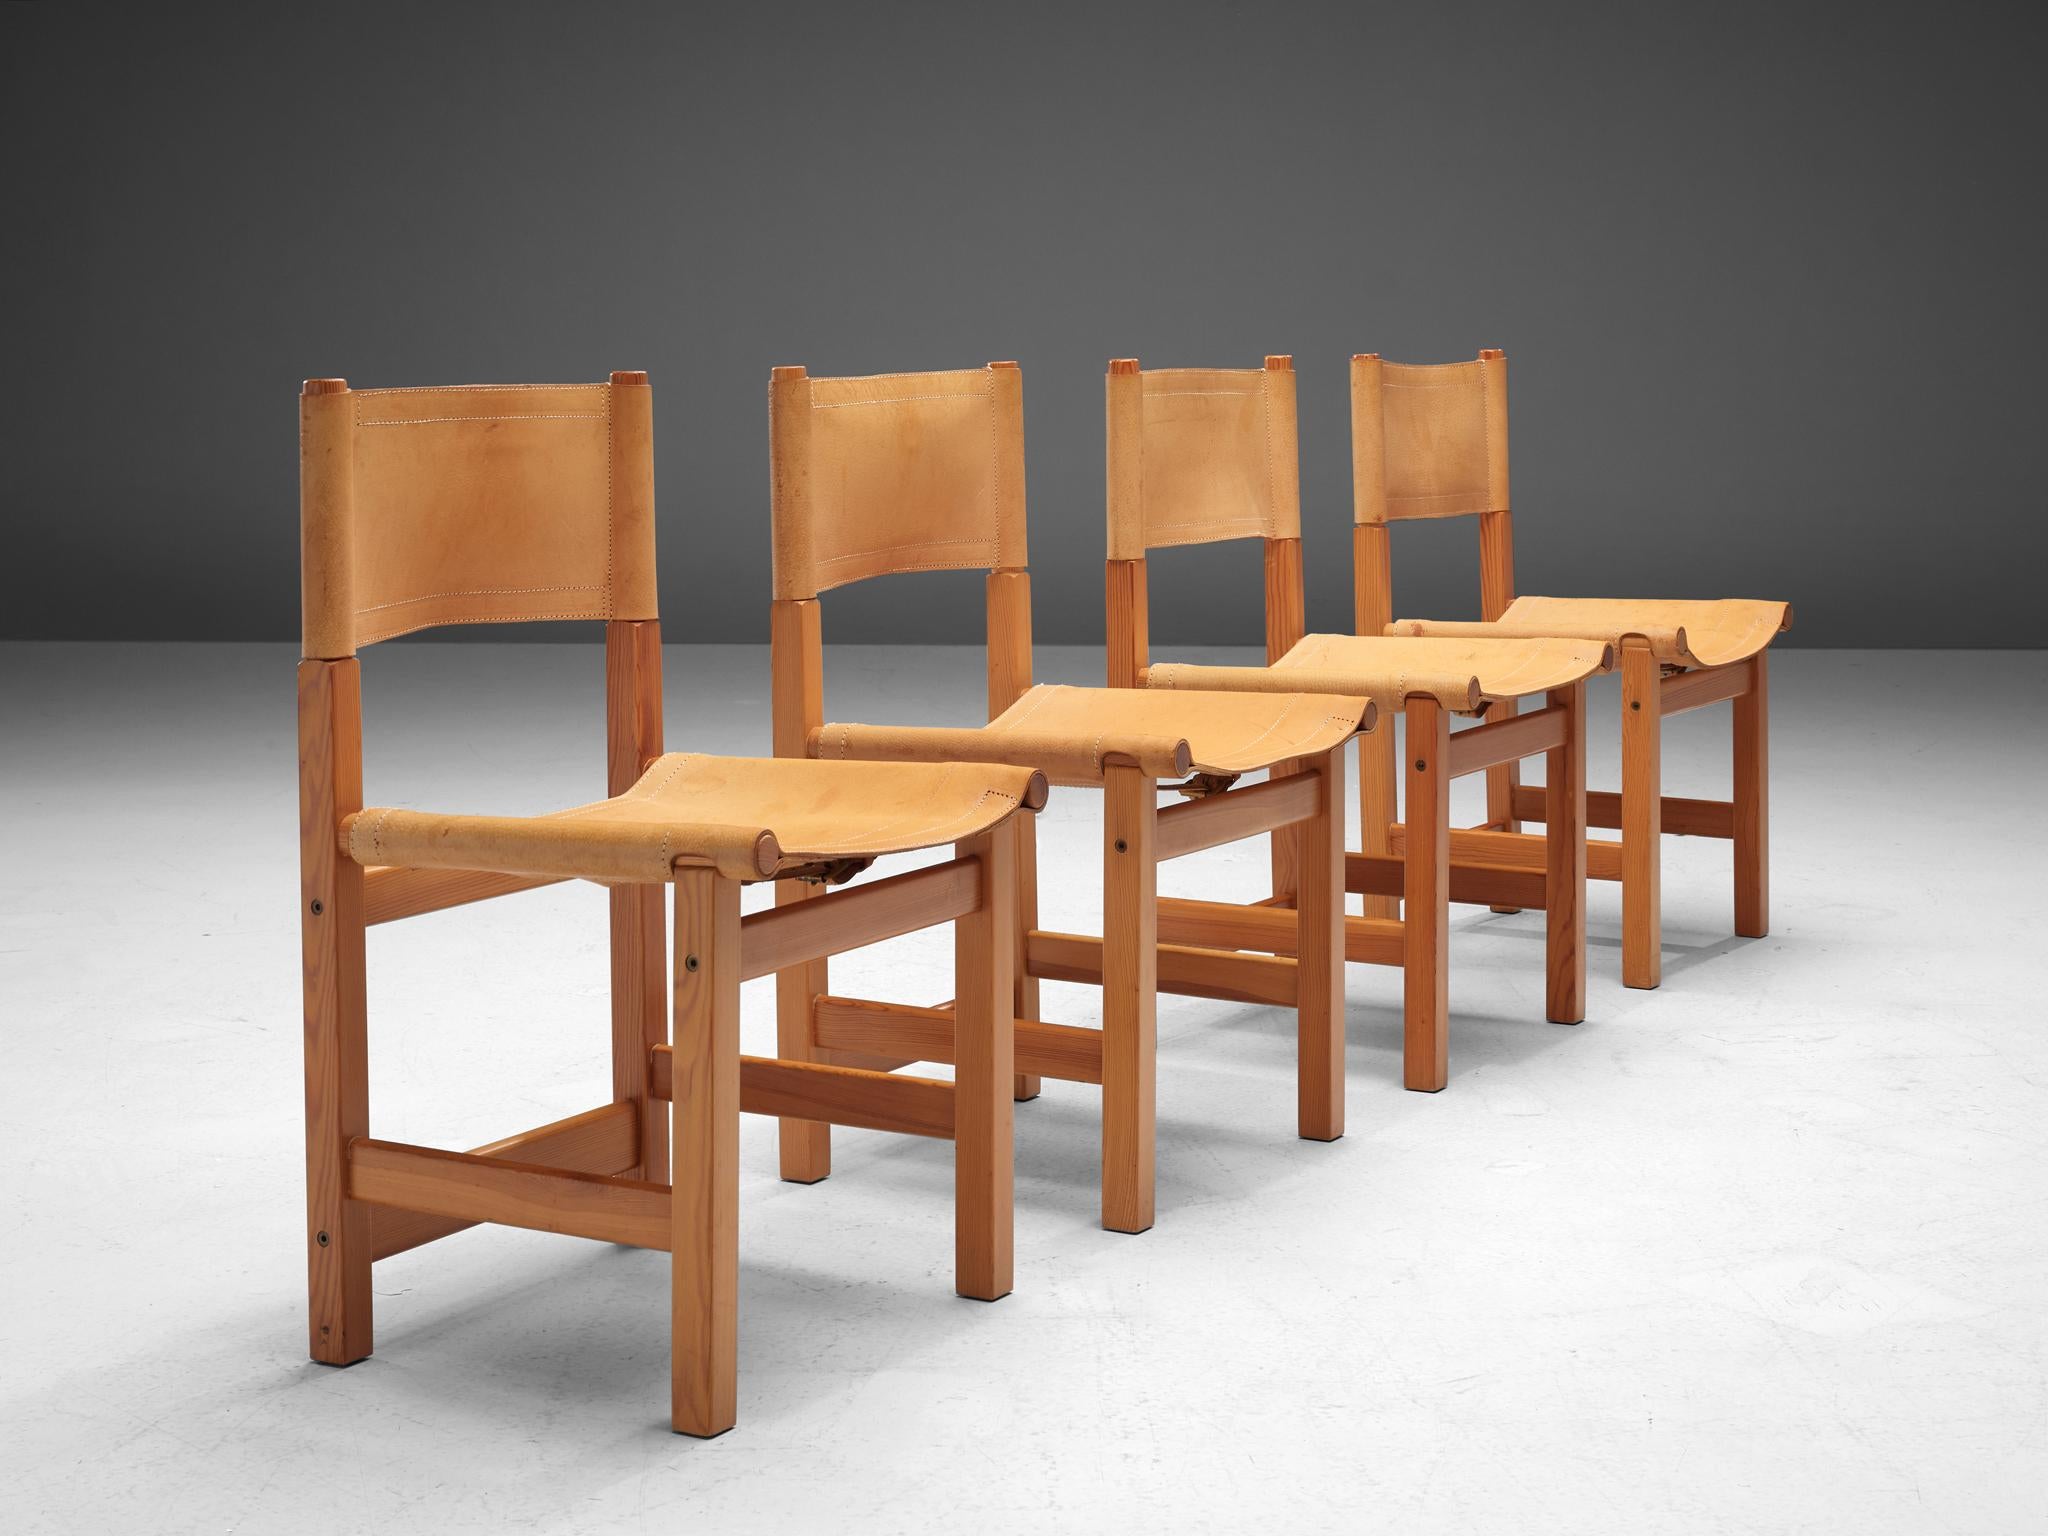 Set of four dining chairs, pine and leather, Sweden, 1970s.

A Swedish set of four robust dining chairs with a simplistic design, featuring straight lines and a sincere construction in pine wood. The naturel colored leather seats and backrests